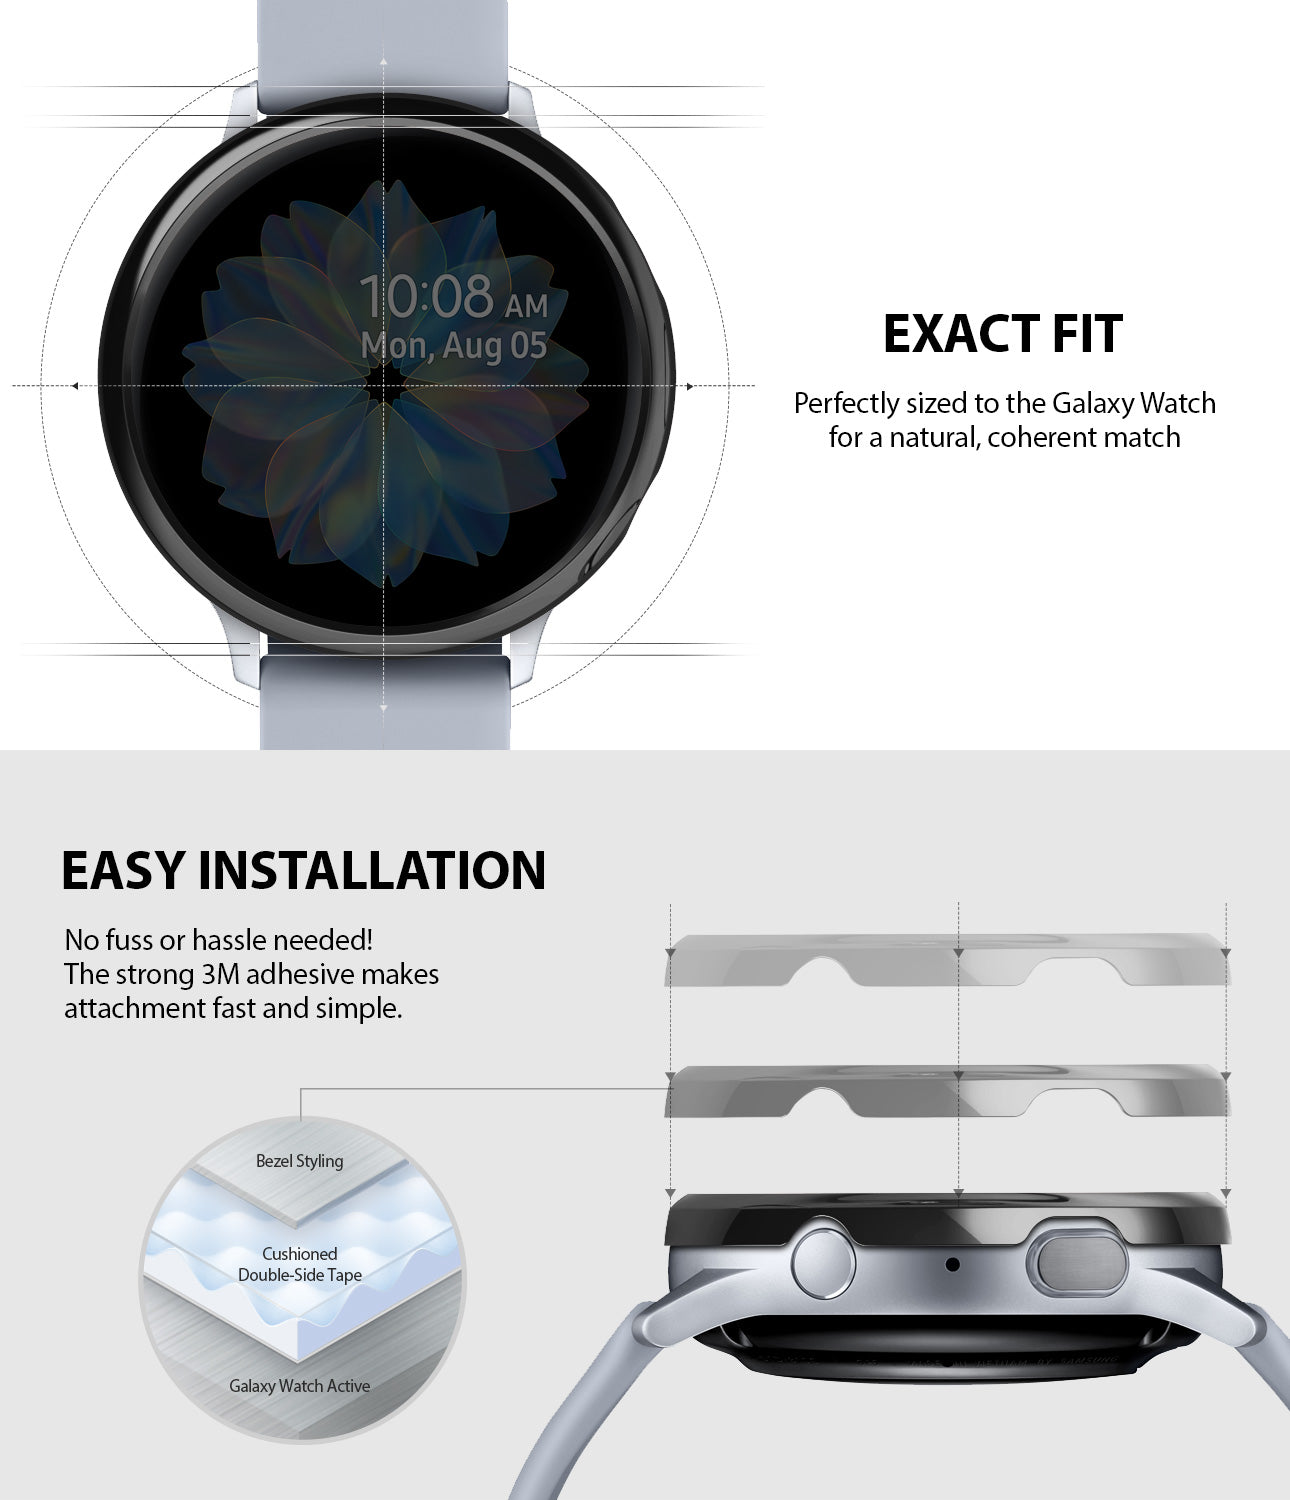 ringke bezel styling for galaxy watch active 2 40mm made with high quality stainless steel scratch resistant material